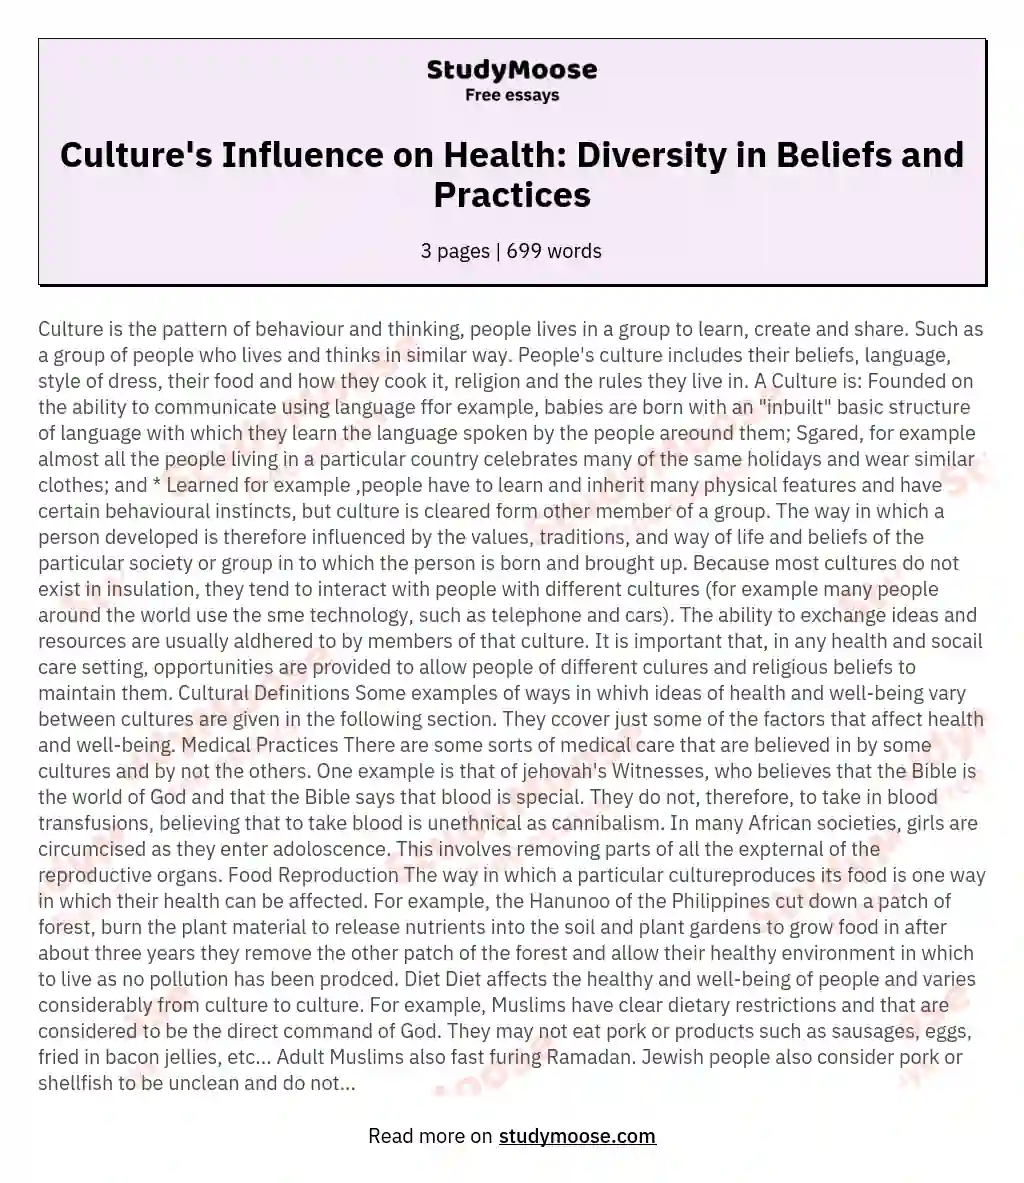 Culture's Influence on Health: Diversity in Beliefs and Practices essay